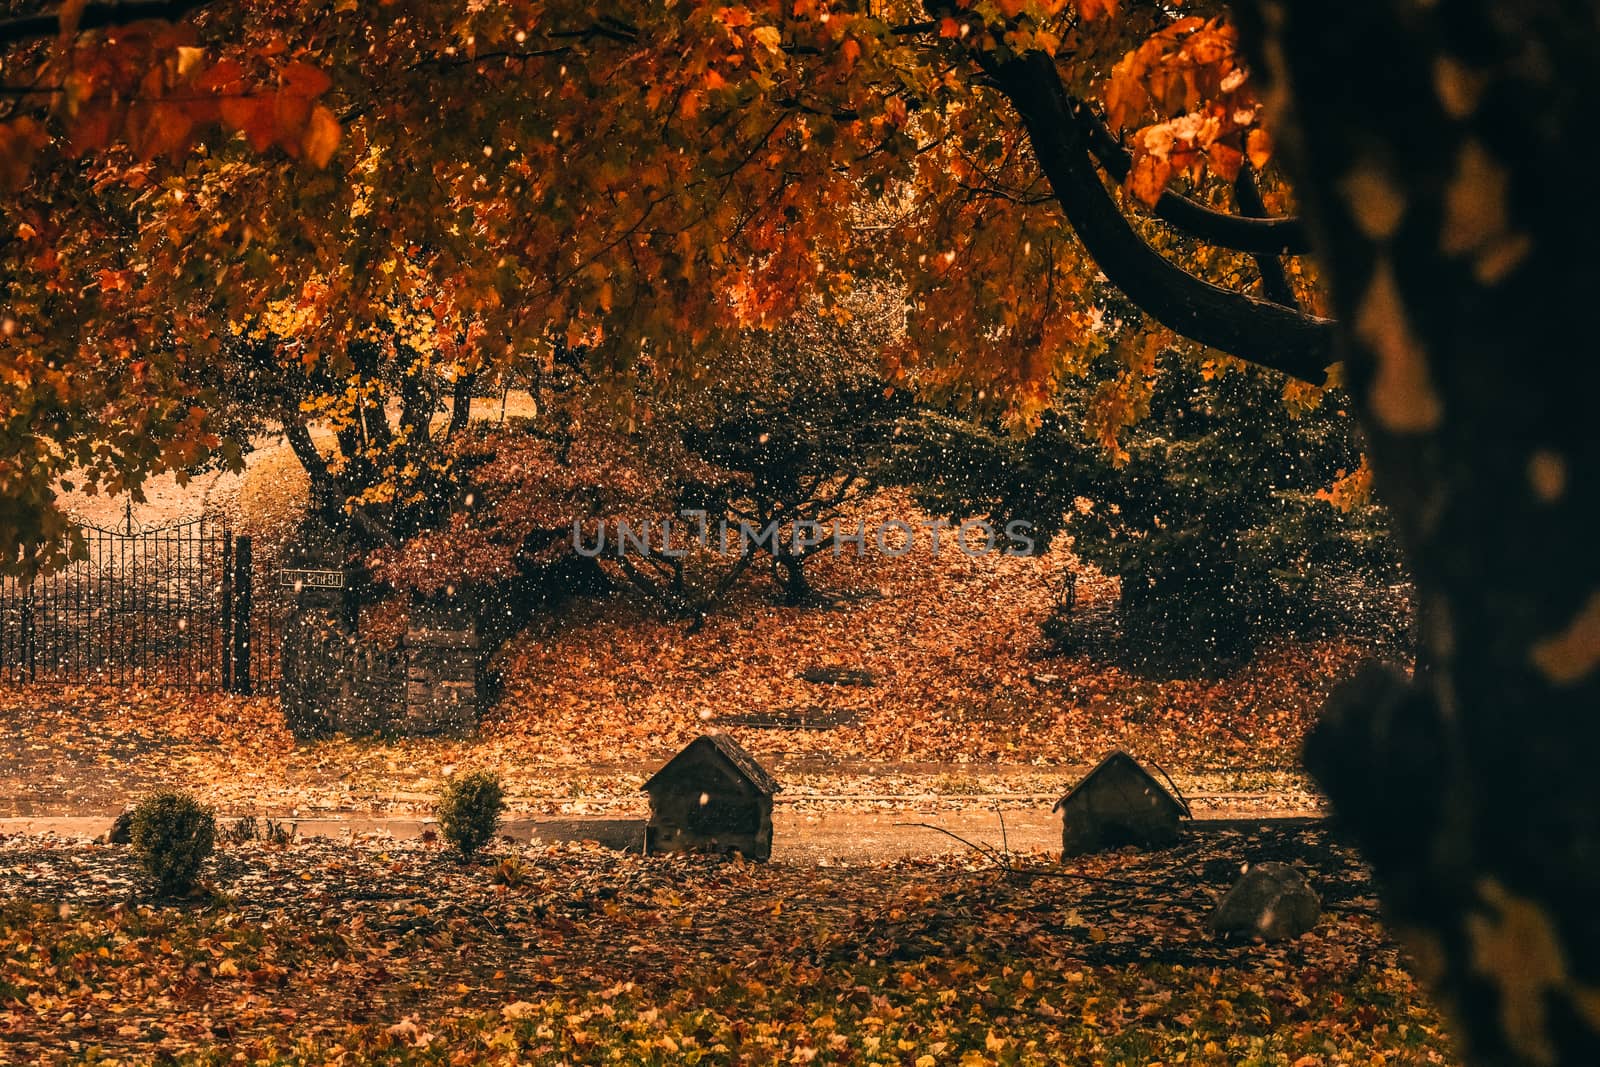 An Early Snowfall in a Bright Orange Autumn Landscape